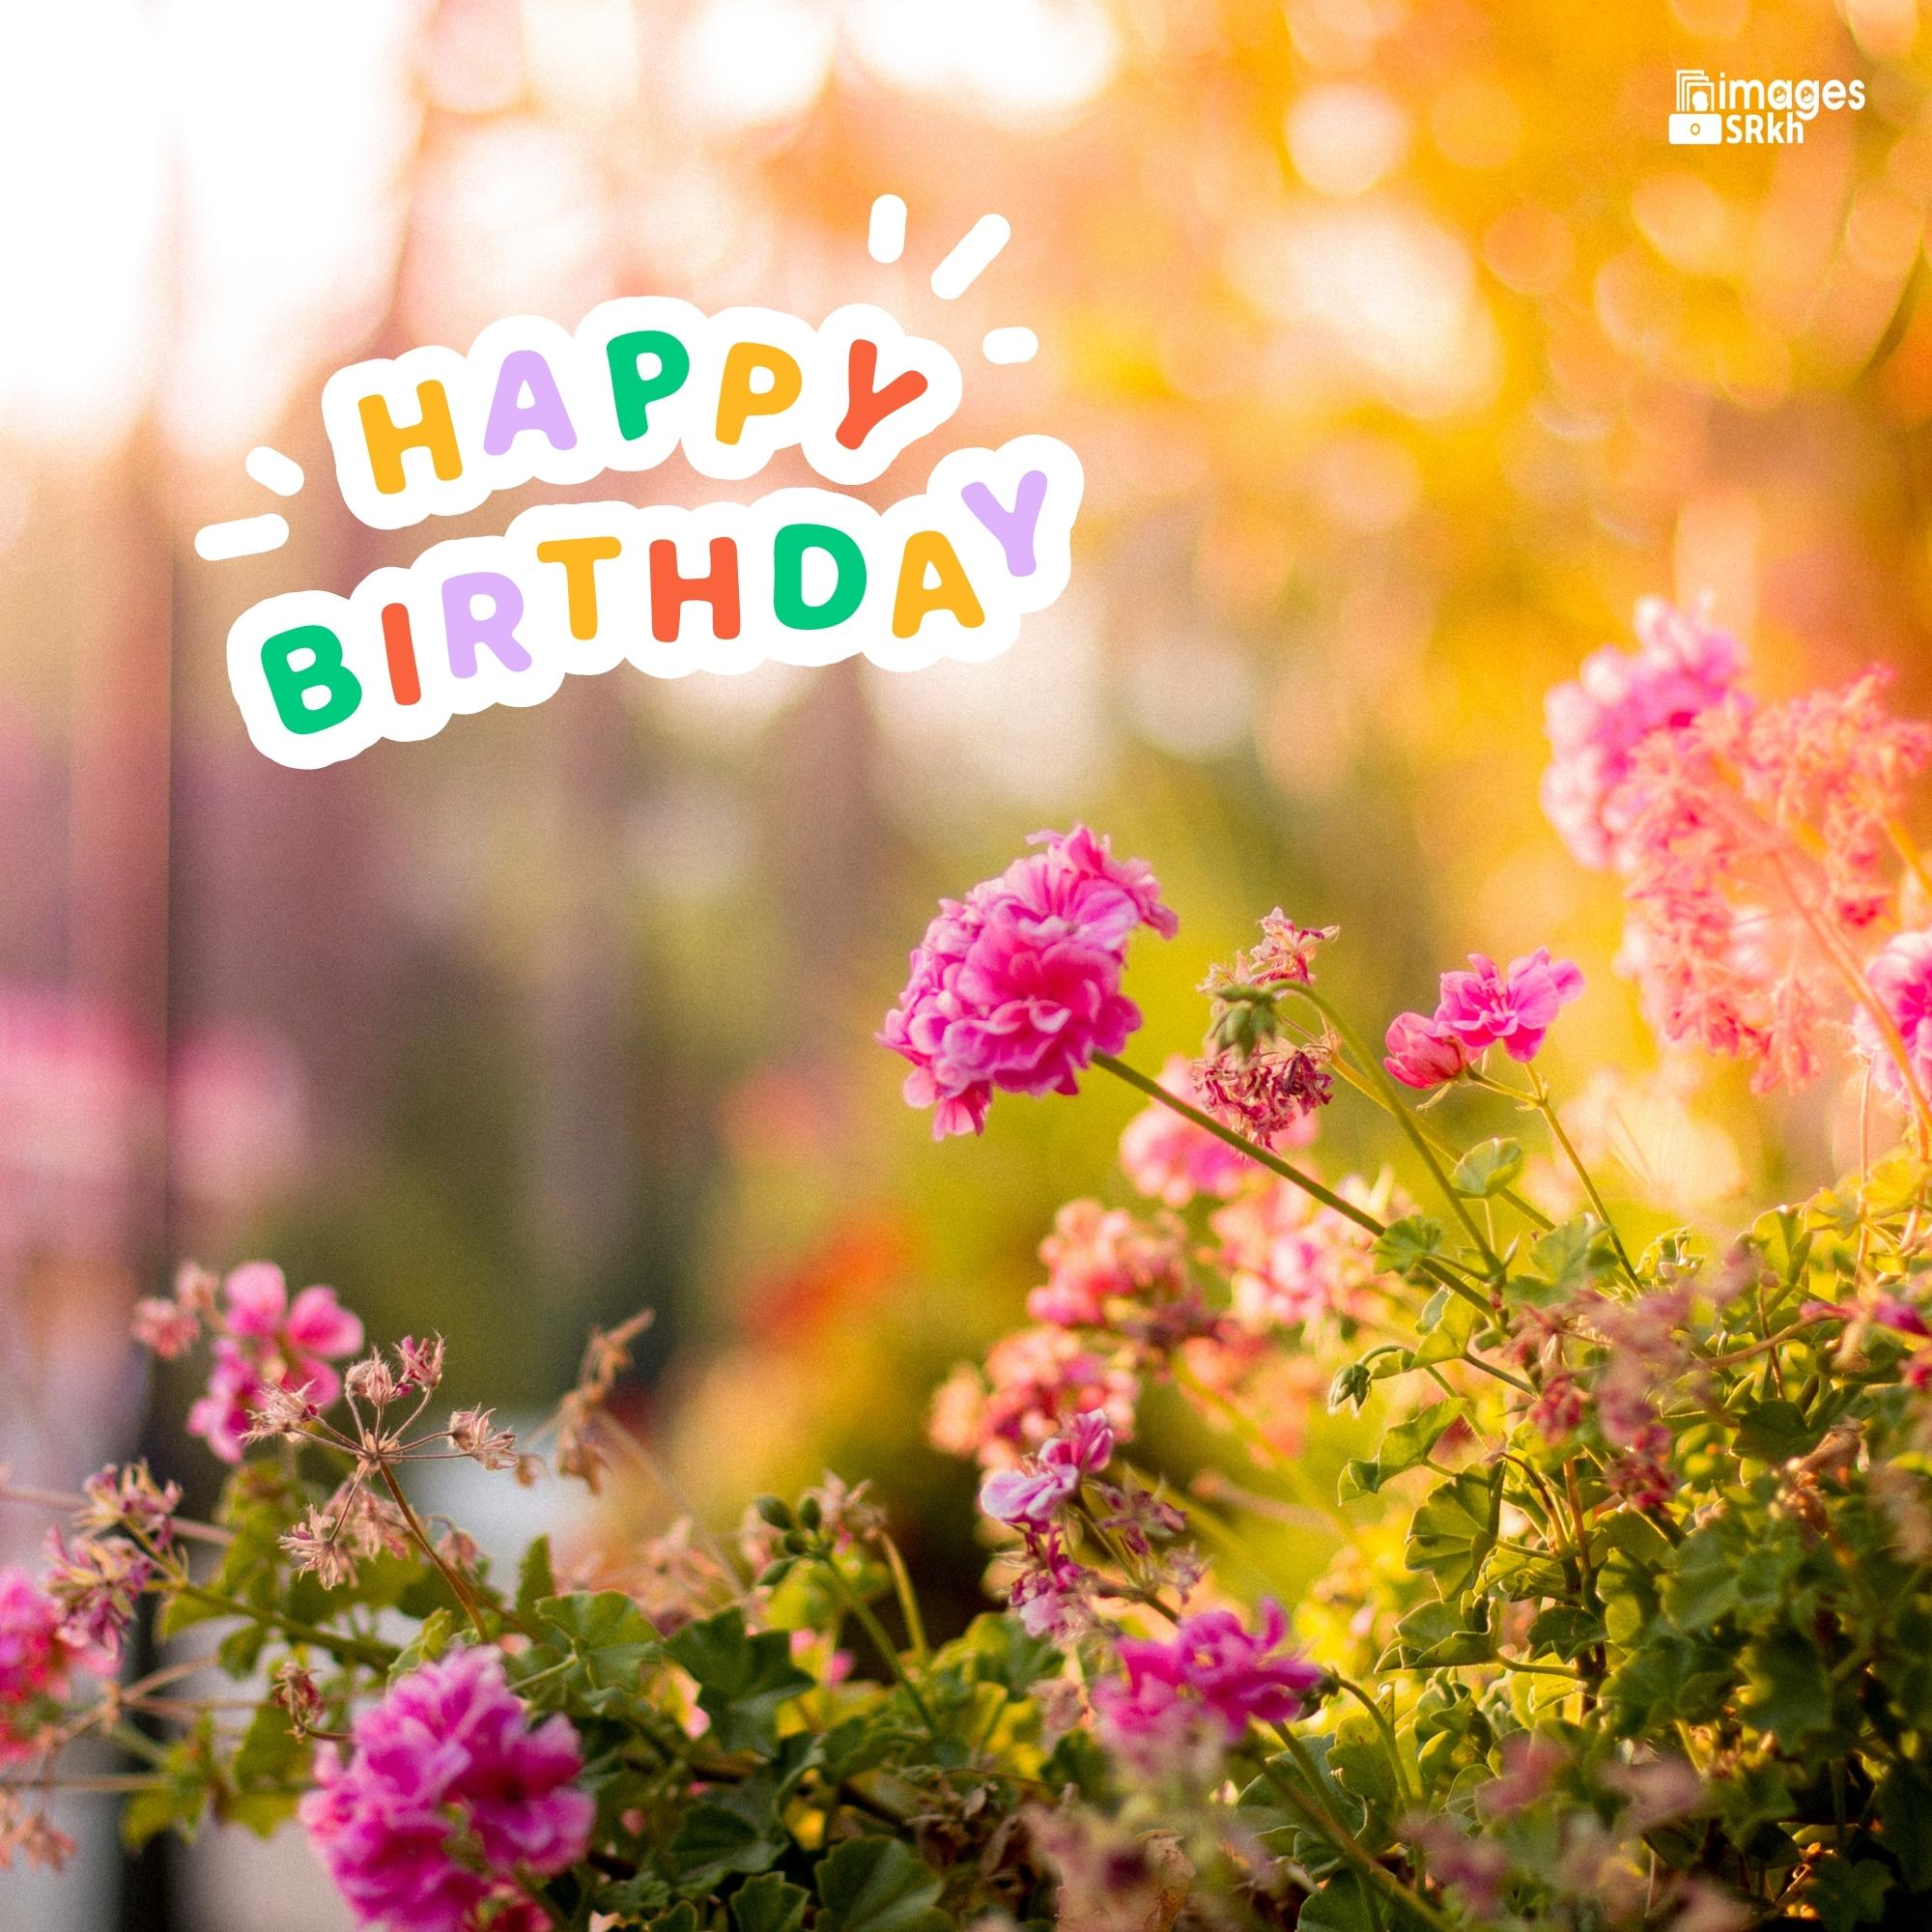 Happy Birthday Images Of Flowers Hd Quality